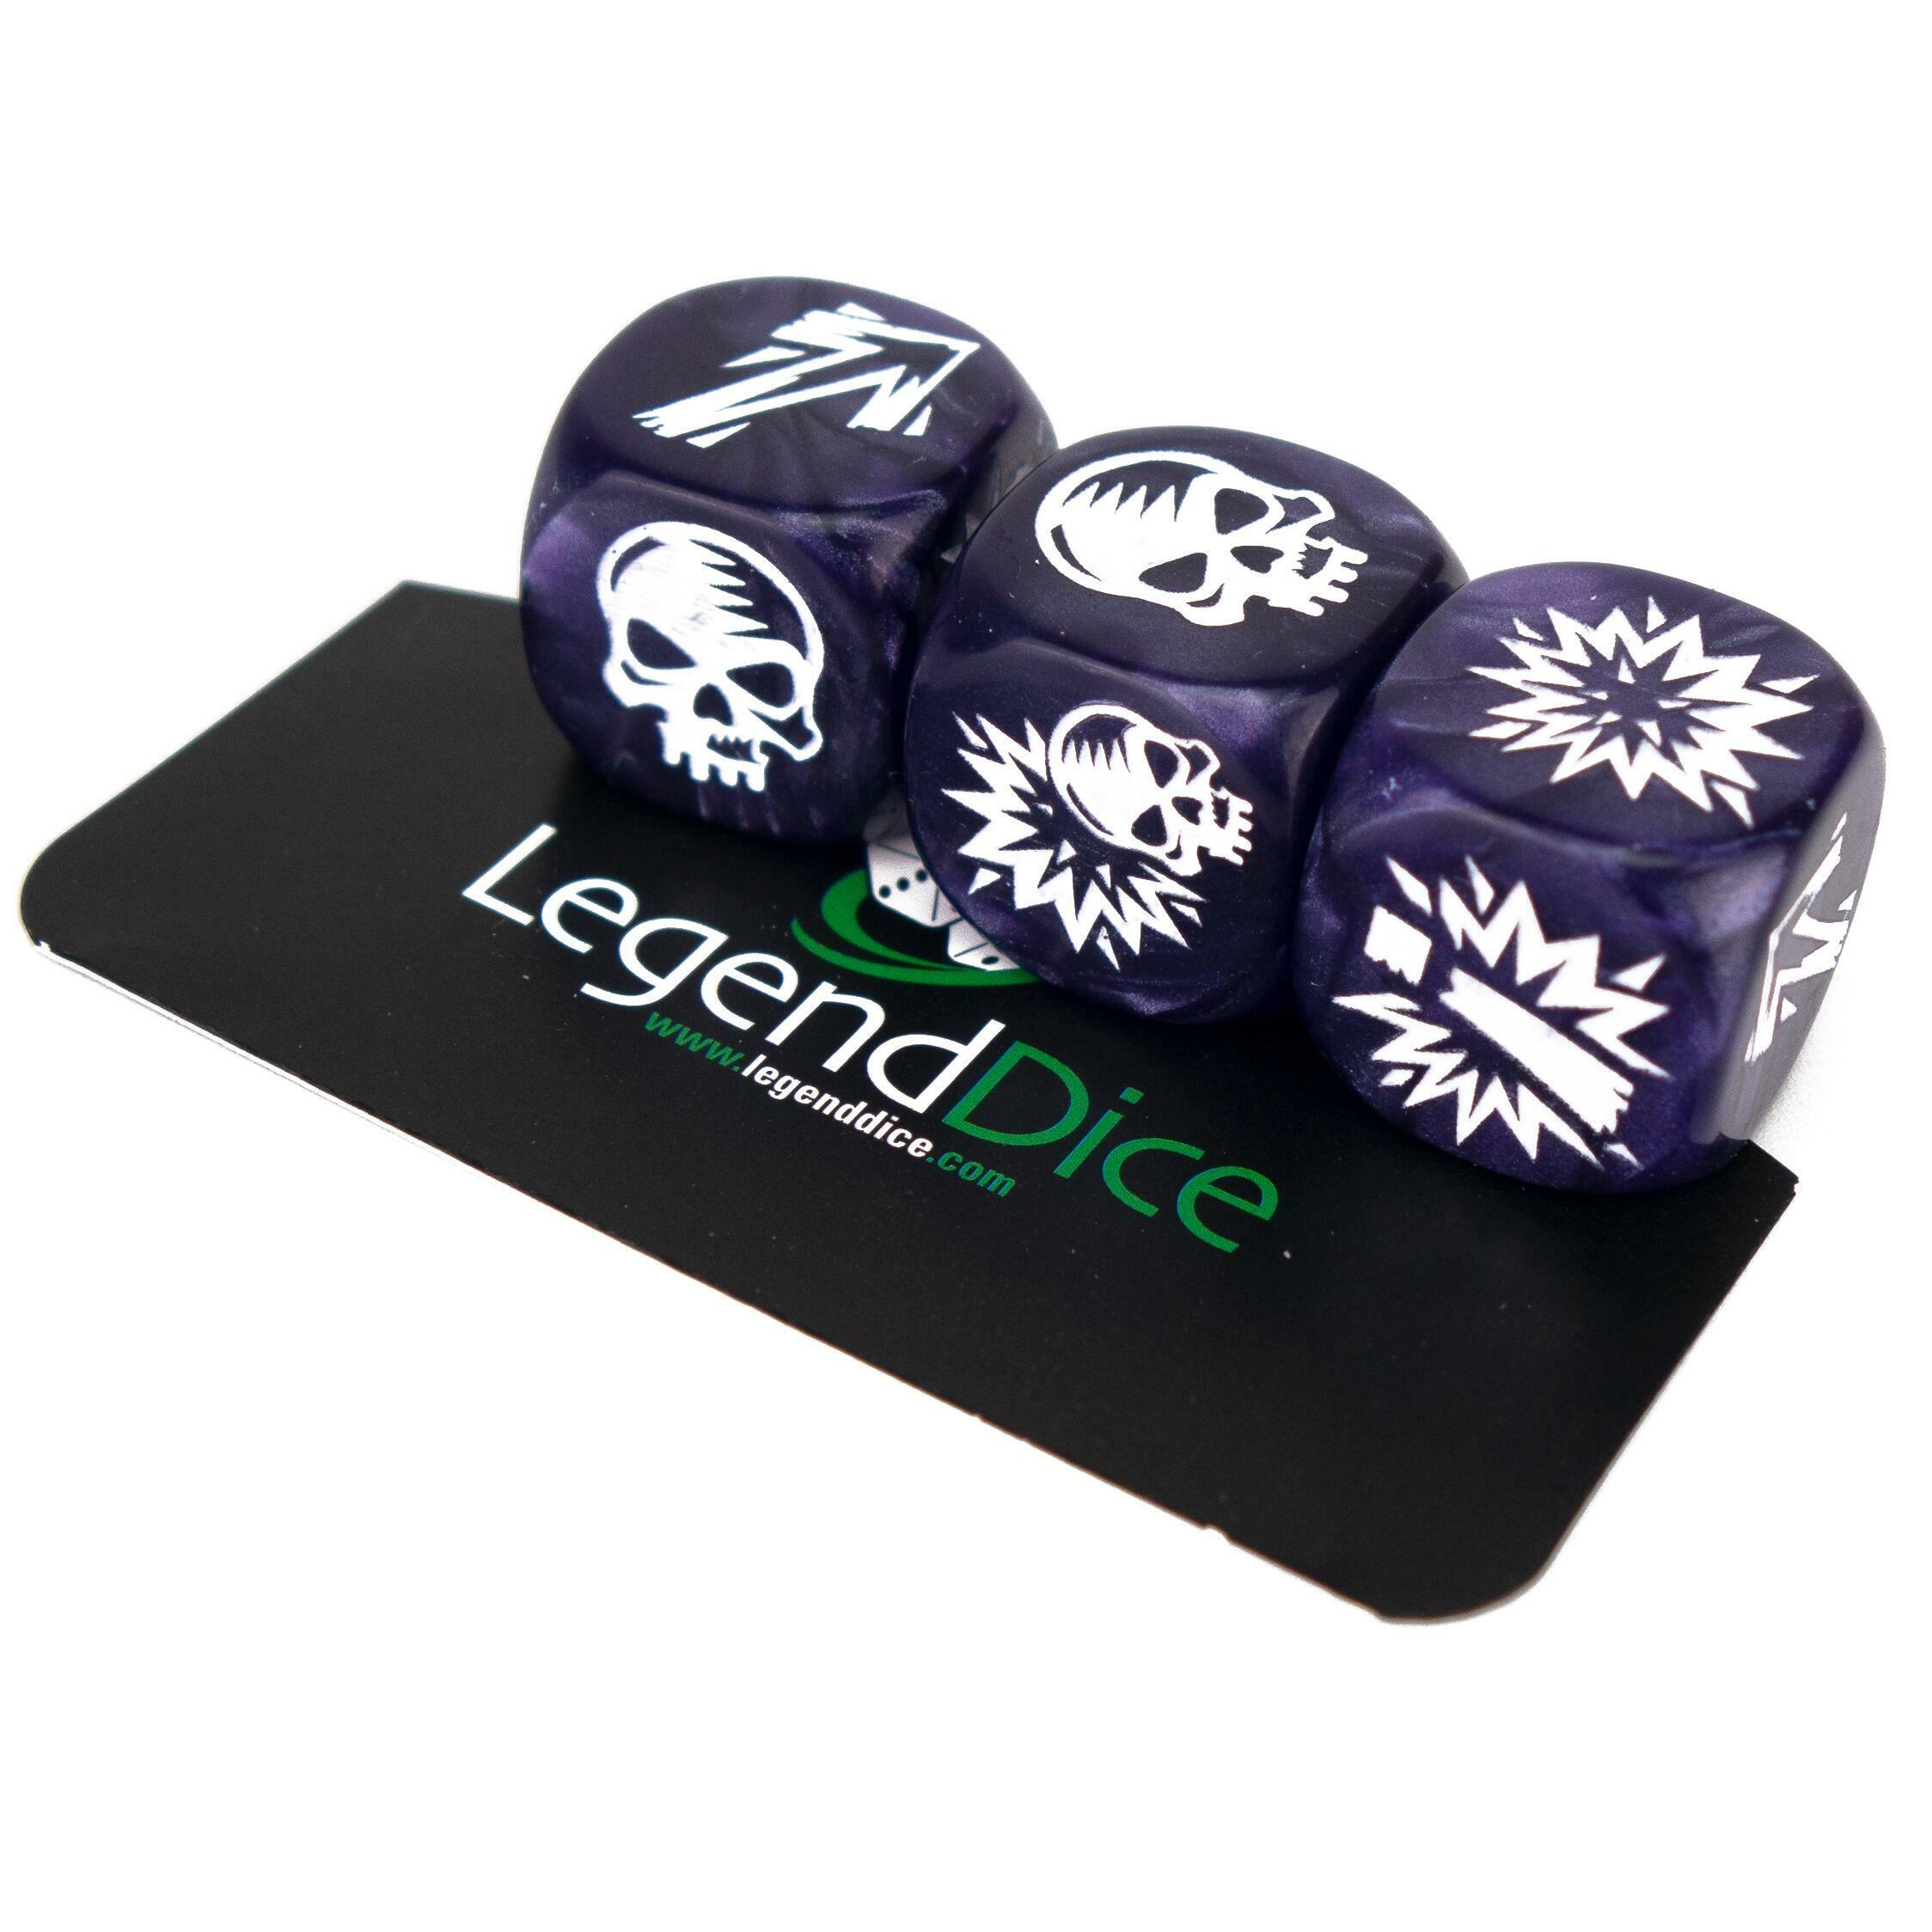 Picture of Blocking Dice Set - Pearl Purple (White) with bag